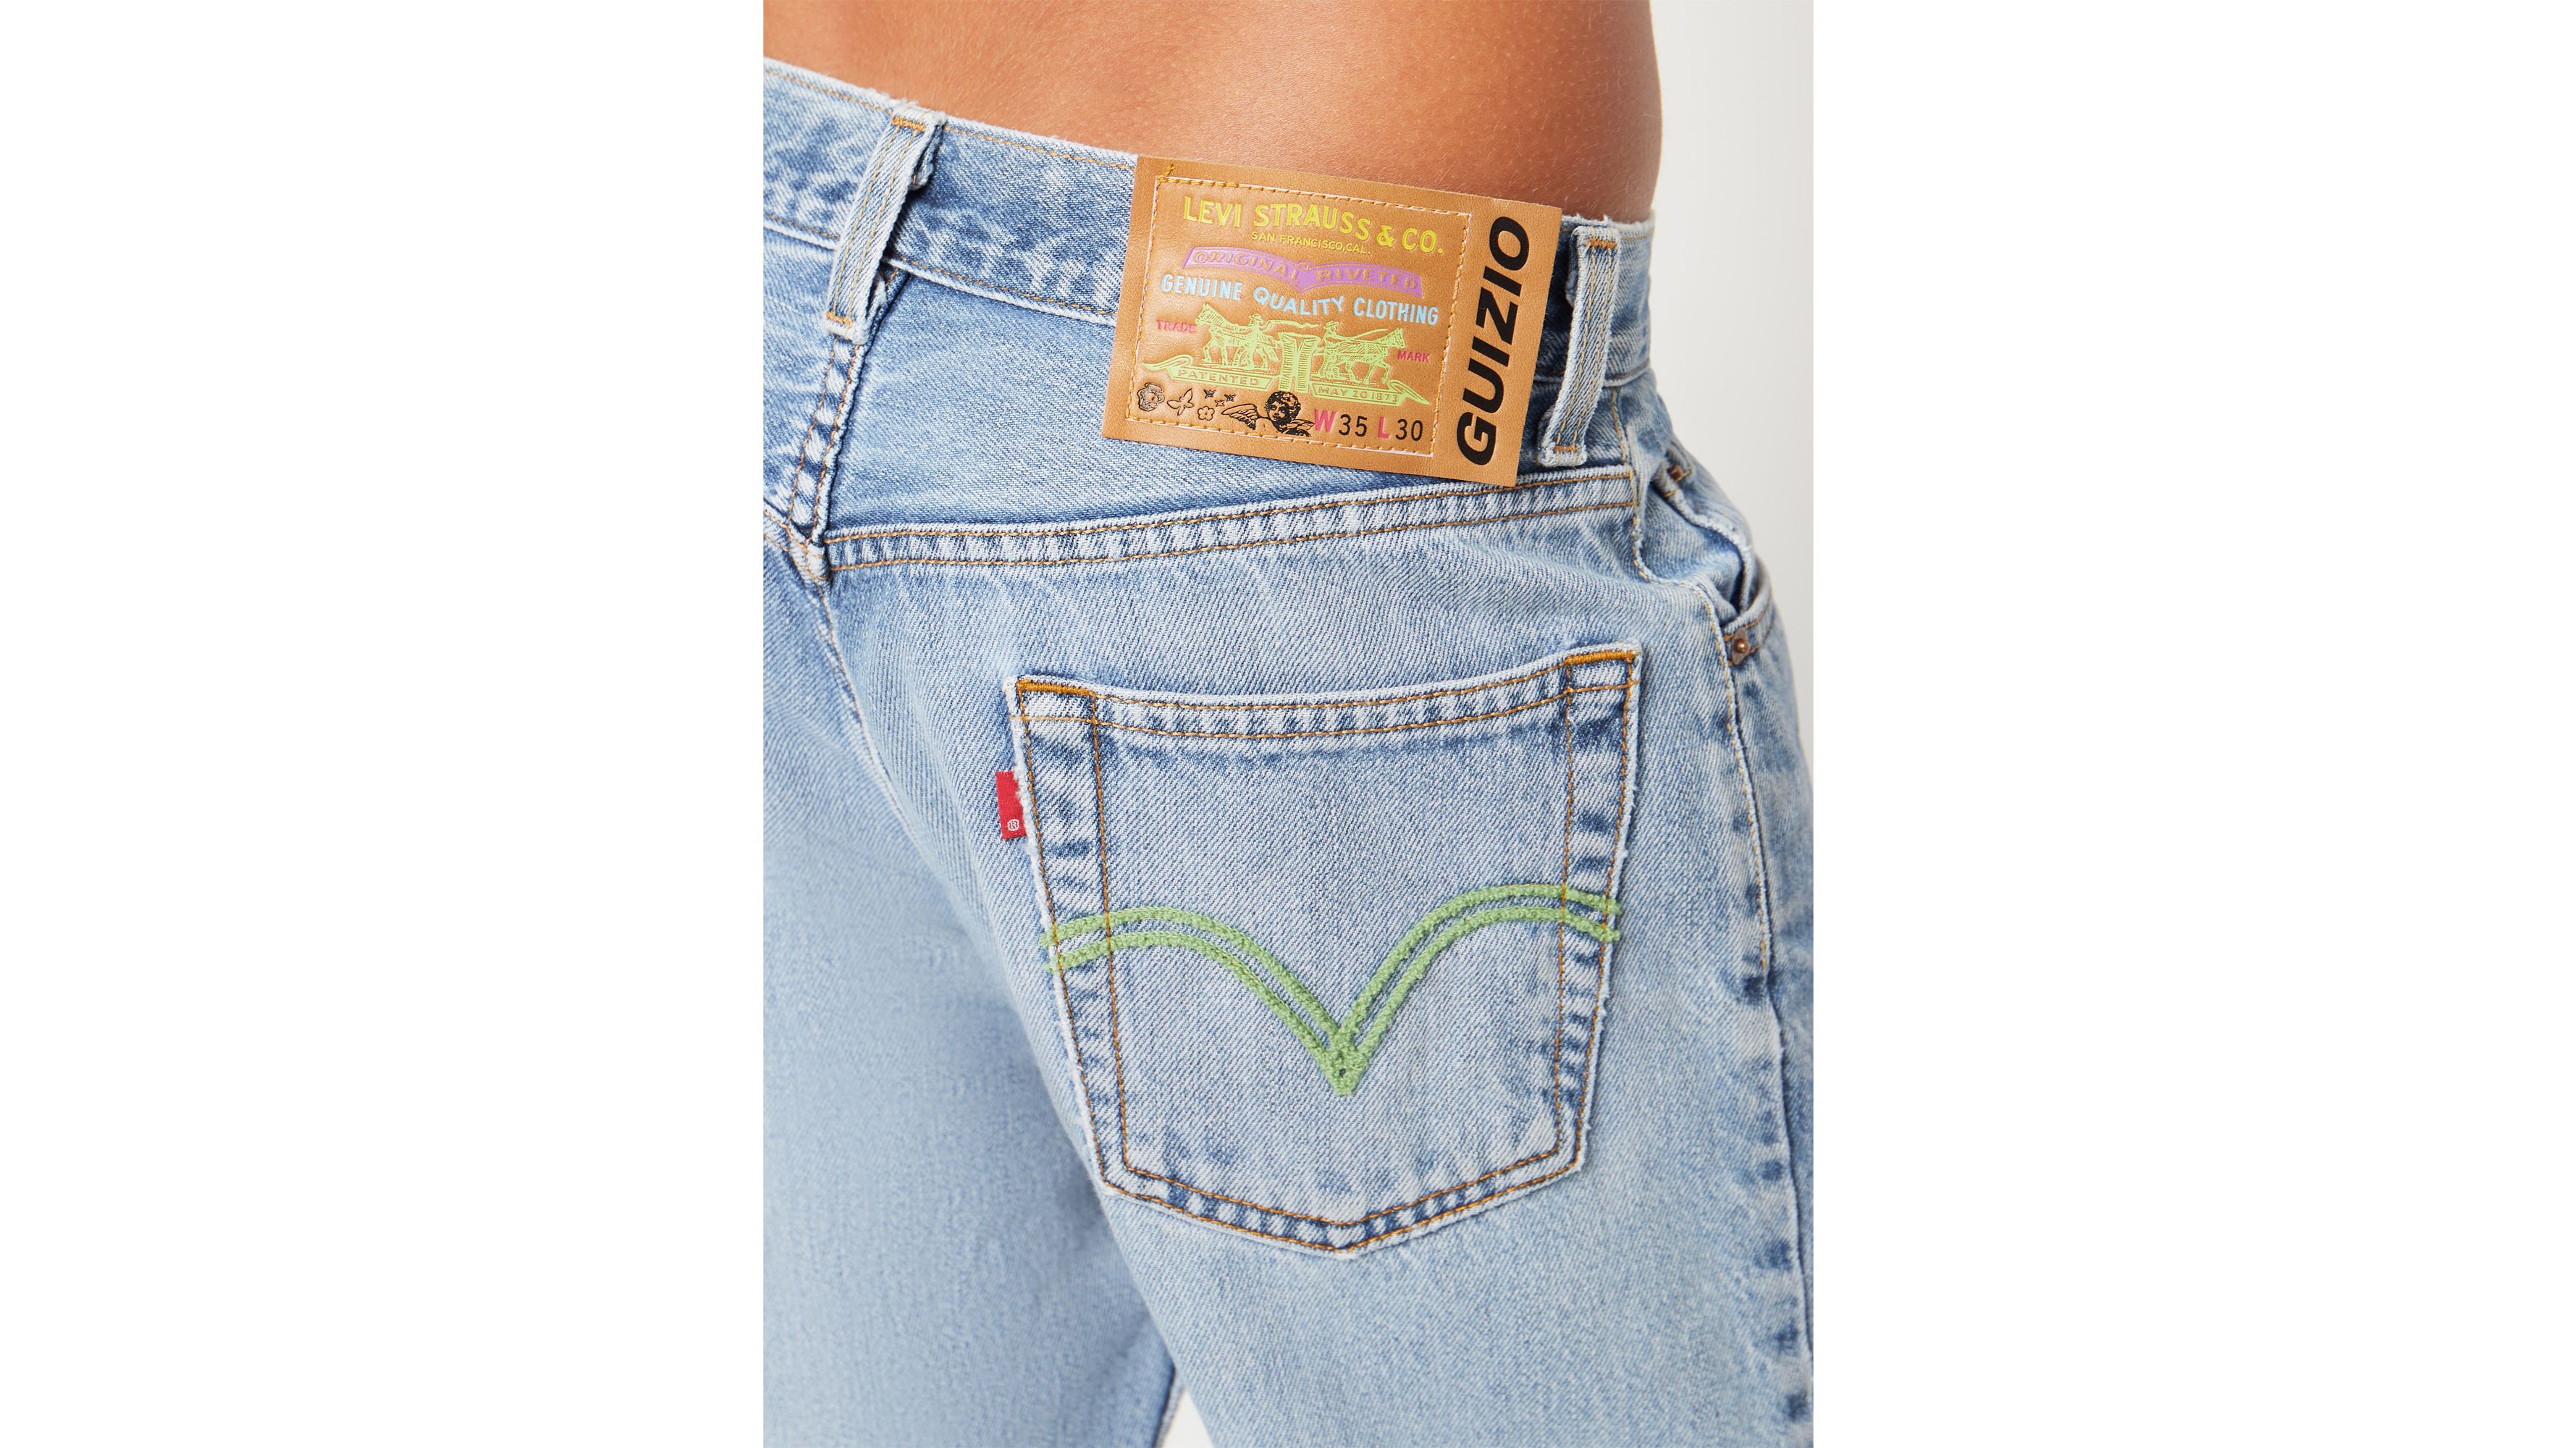 Levi Teams Up With Danielle Guizio On Of-The-Moment Denim Capsule